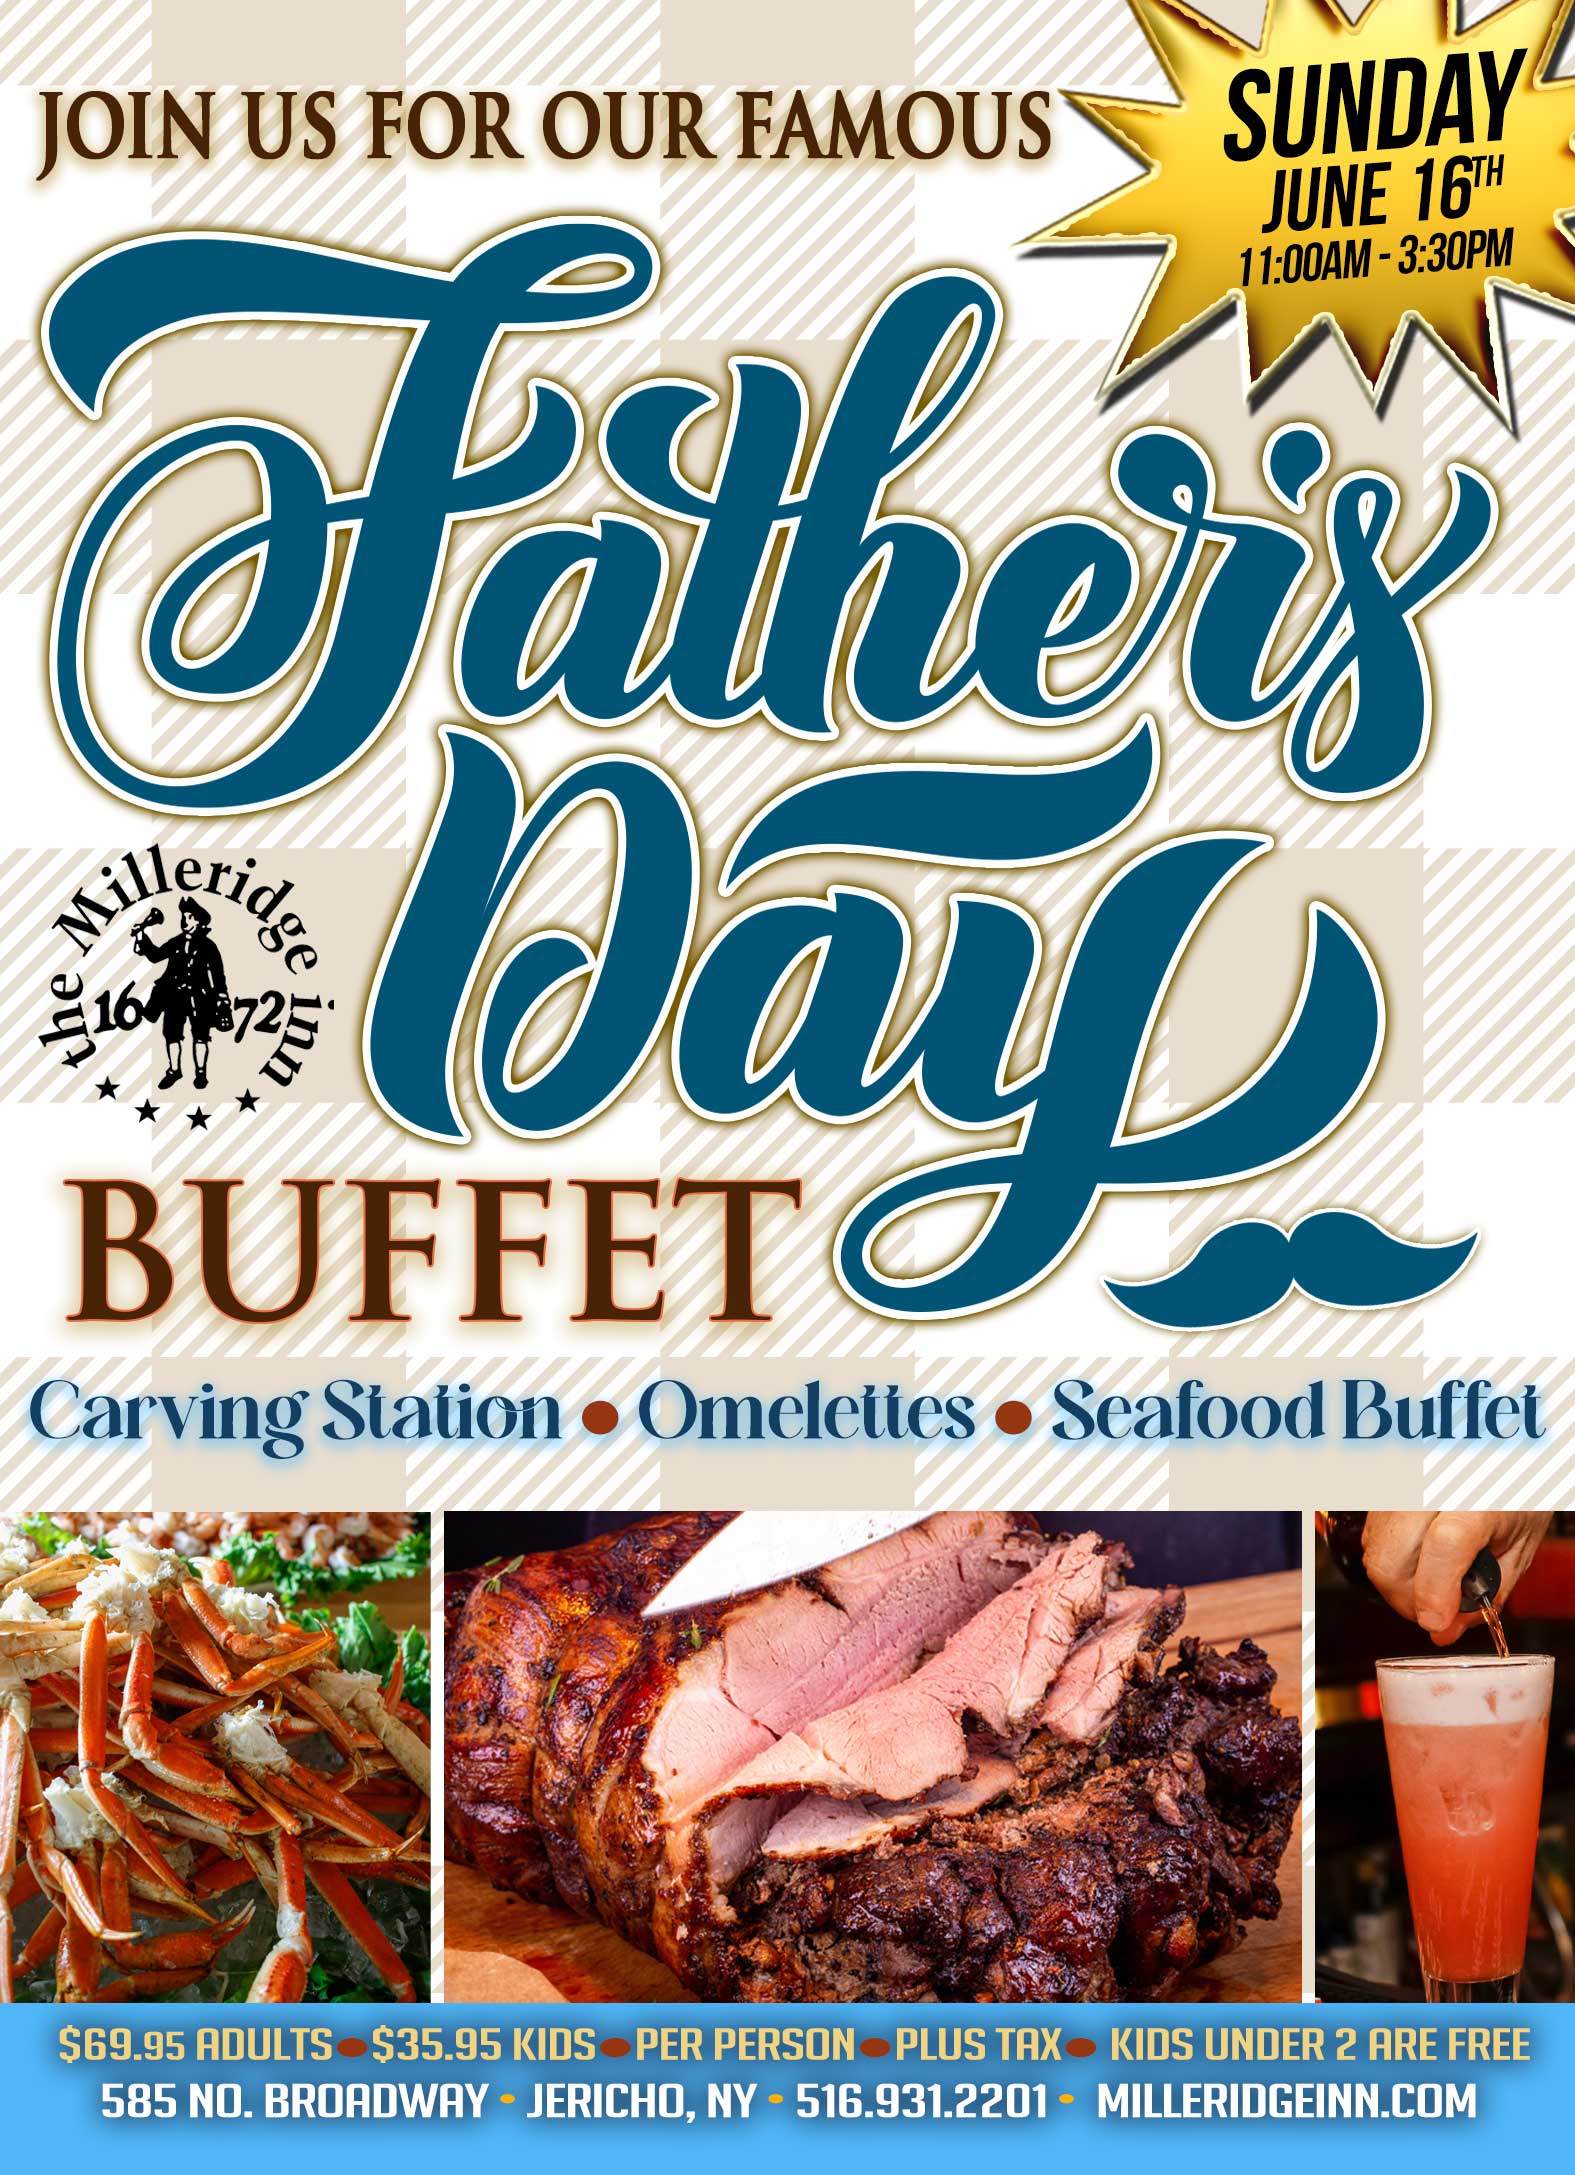 Fathers Day at the Milleridge Inn